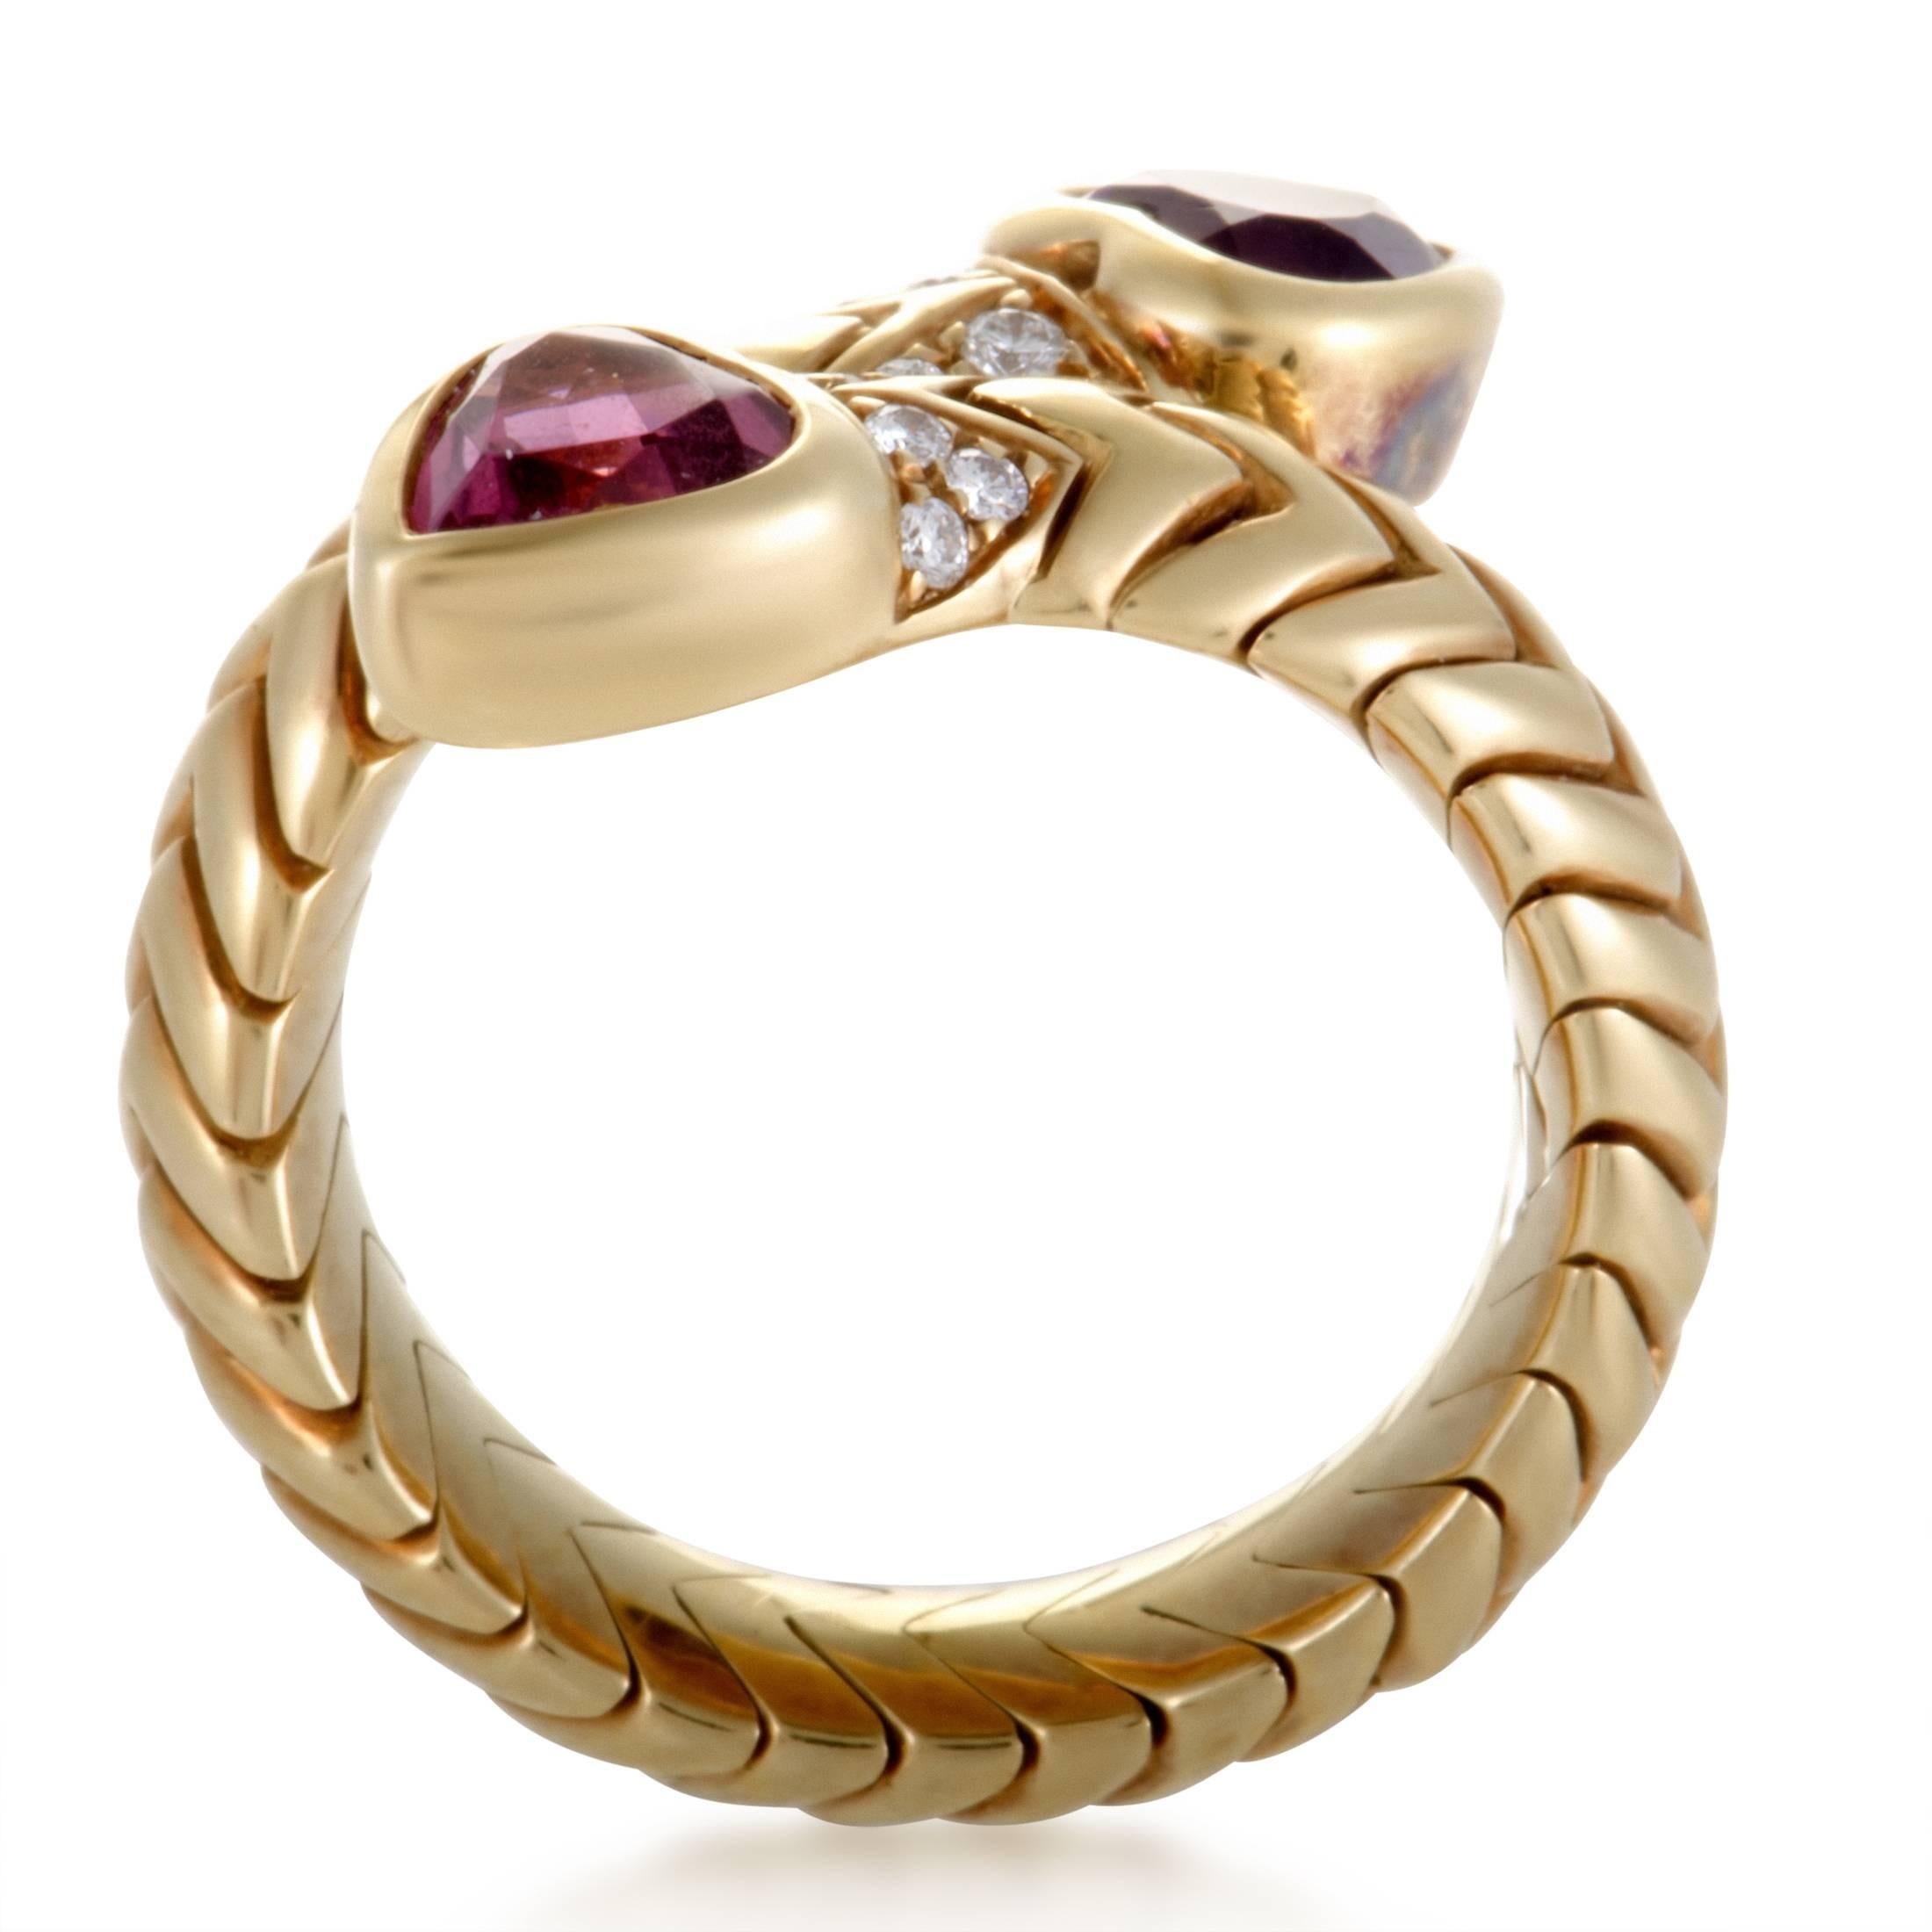 Brilliantly crafted in shimmering 18K yellow gold, this beautiful ring by Bvlgari is absolutely exemplary in design and style. The stunning ring is adorned in dazzling diamonds, an exquisite amethyst and a sparkling tourmaline stone that immensely